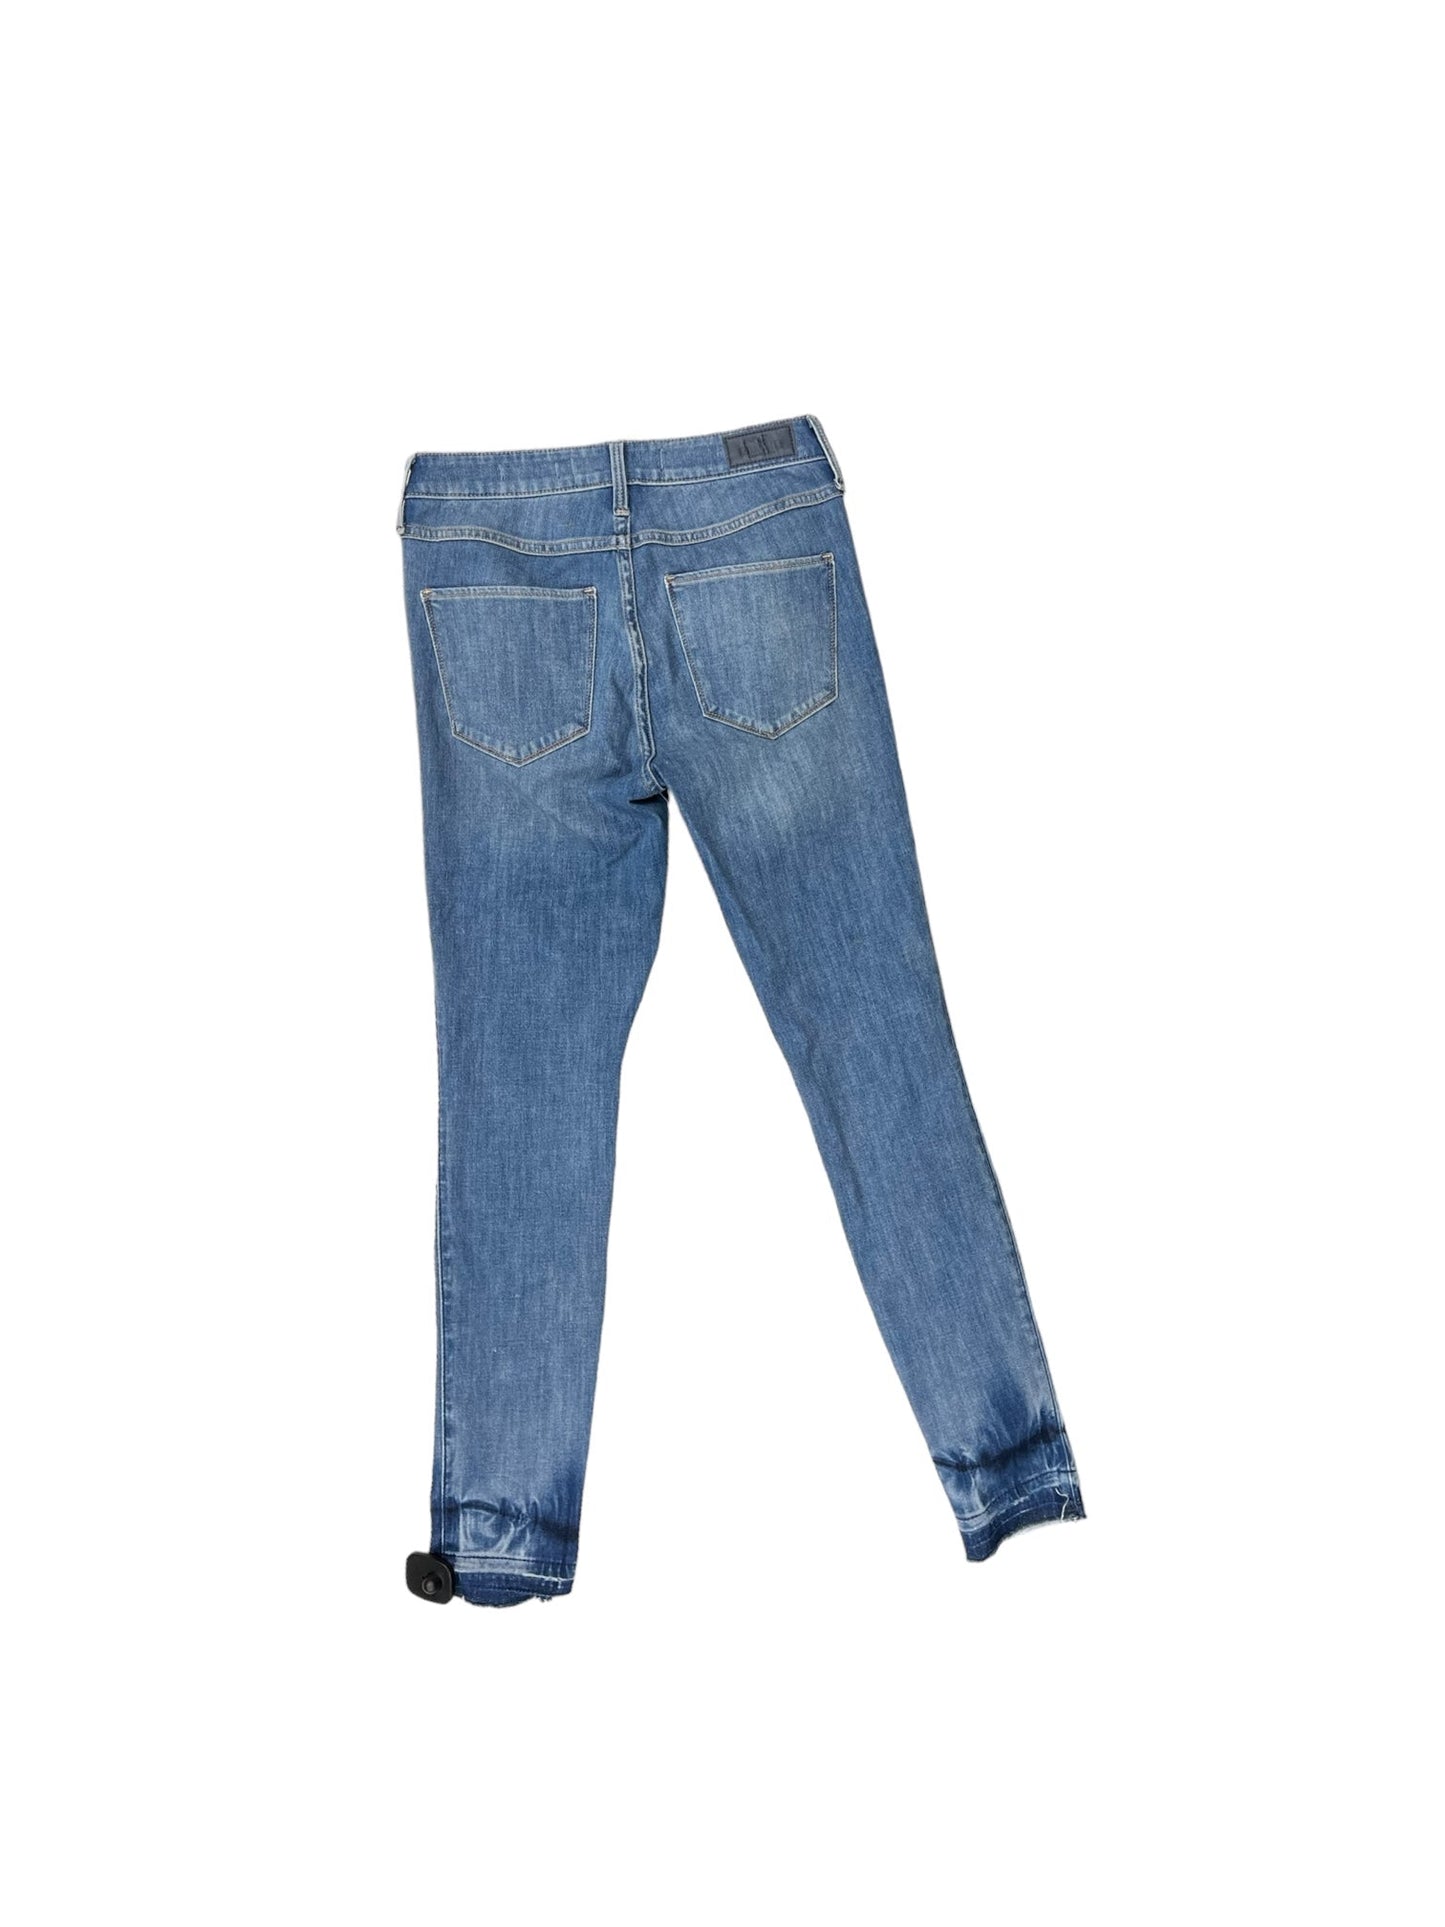 Jeans Skinny By Hollister  Size: 28